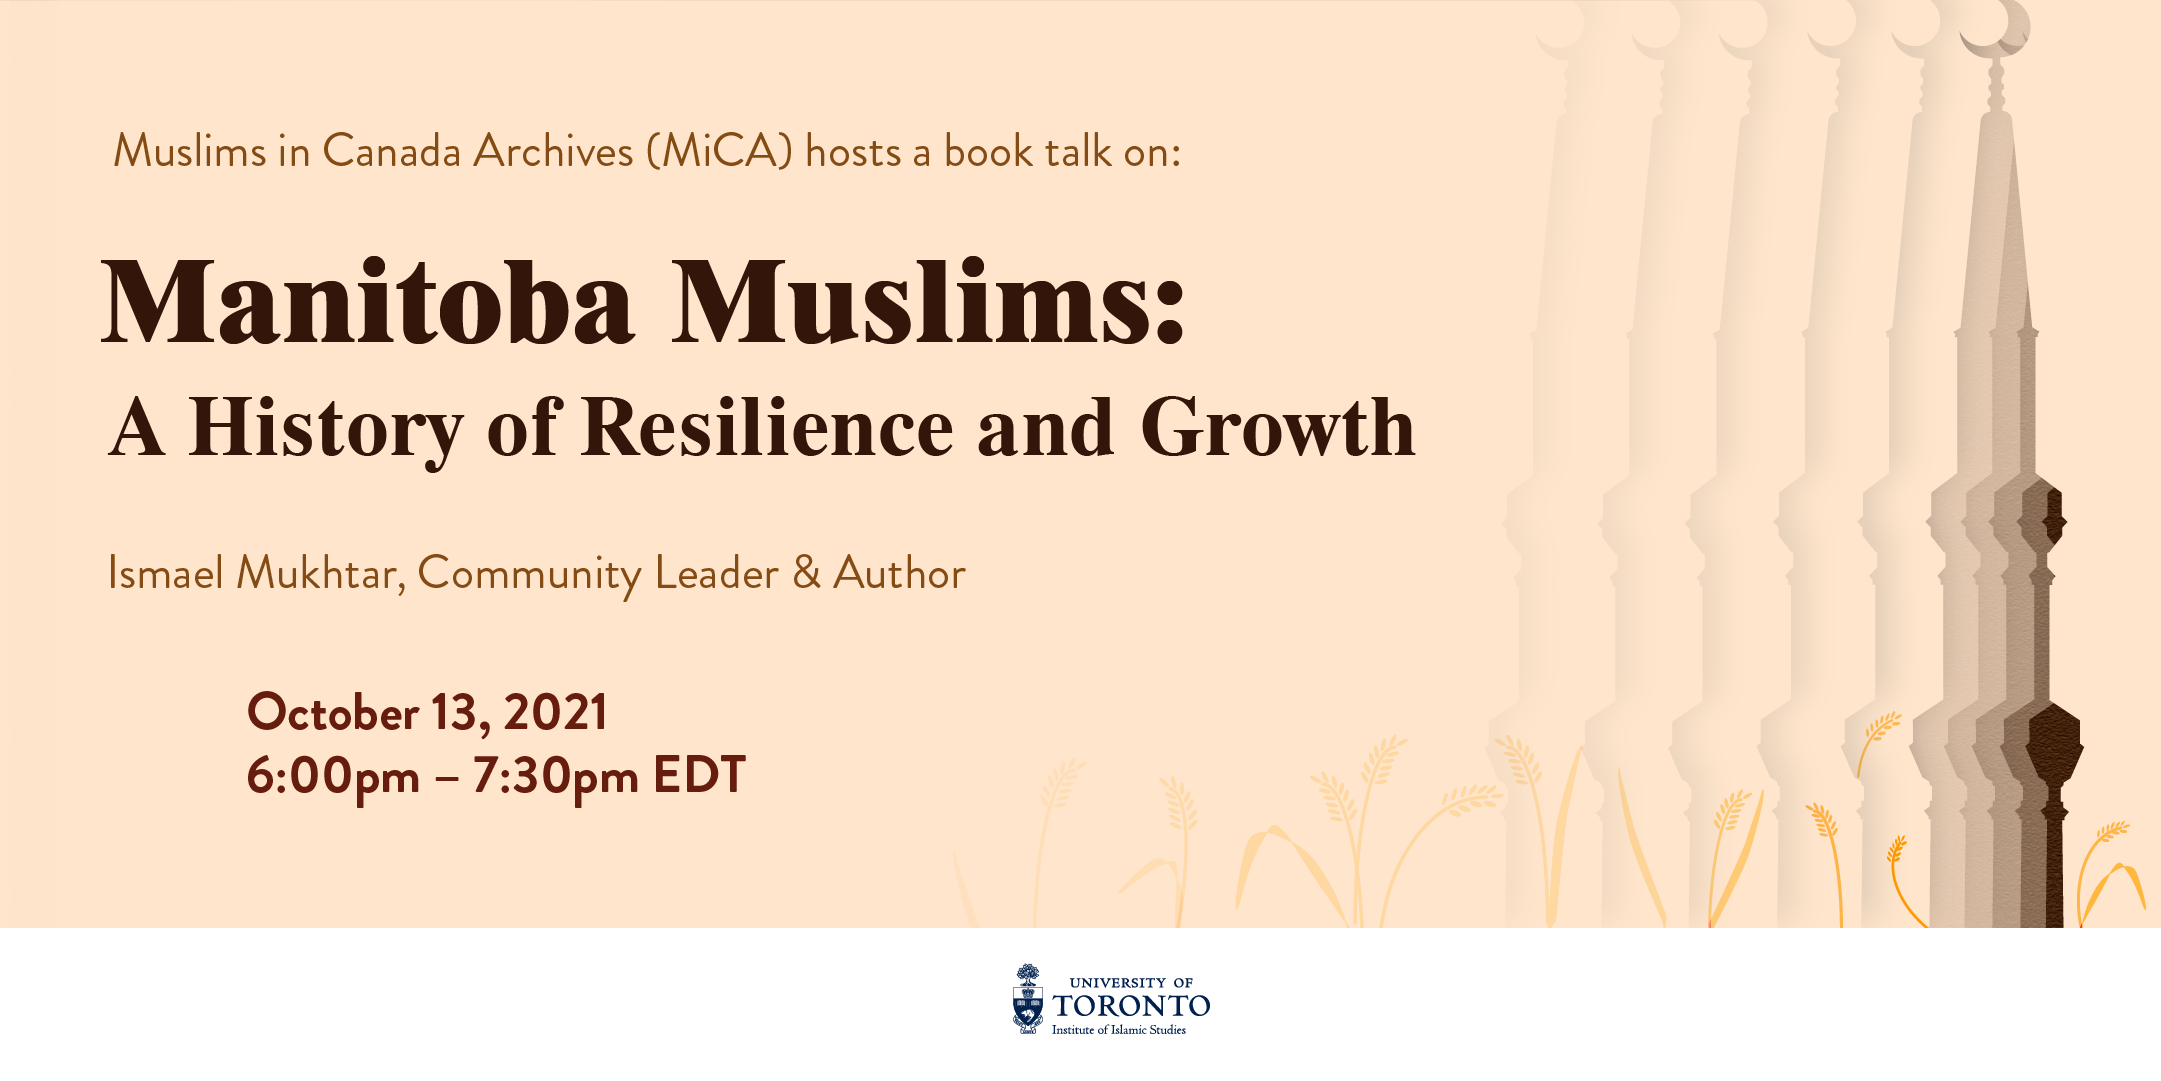 “Manitoba Muslims: A History of Resilience and Growth” Book Talk